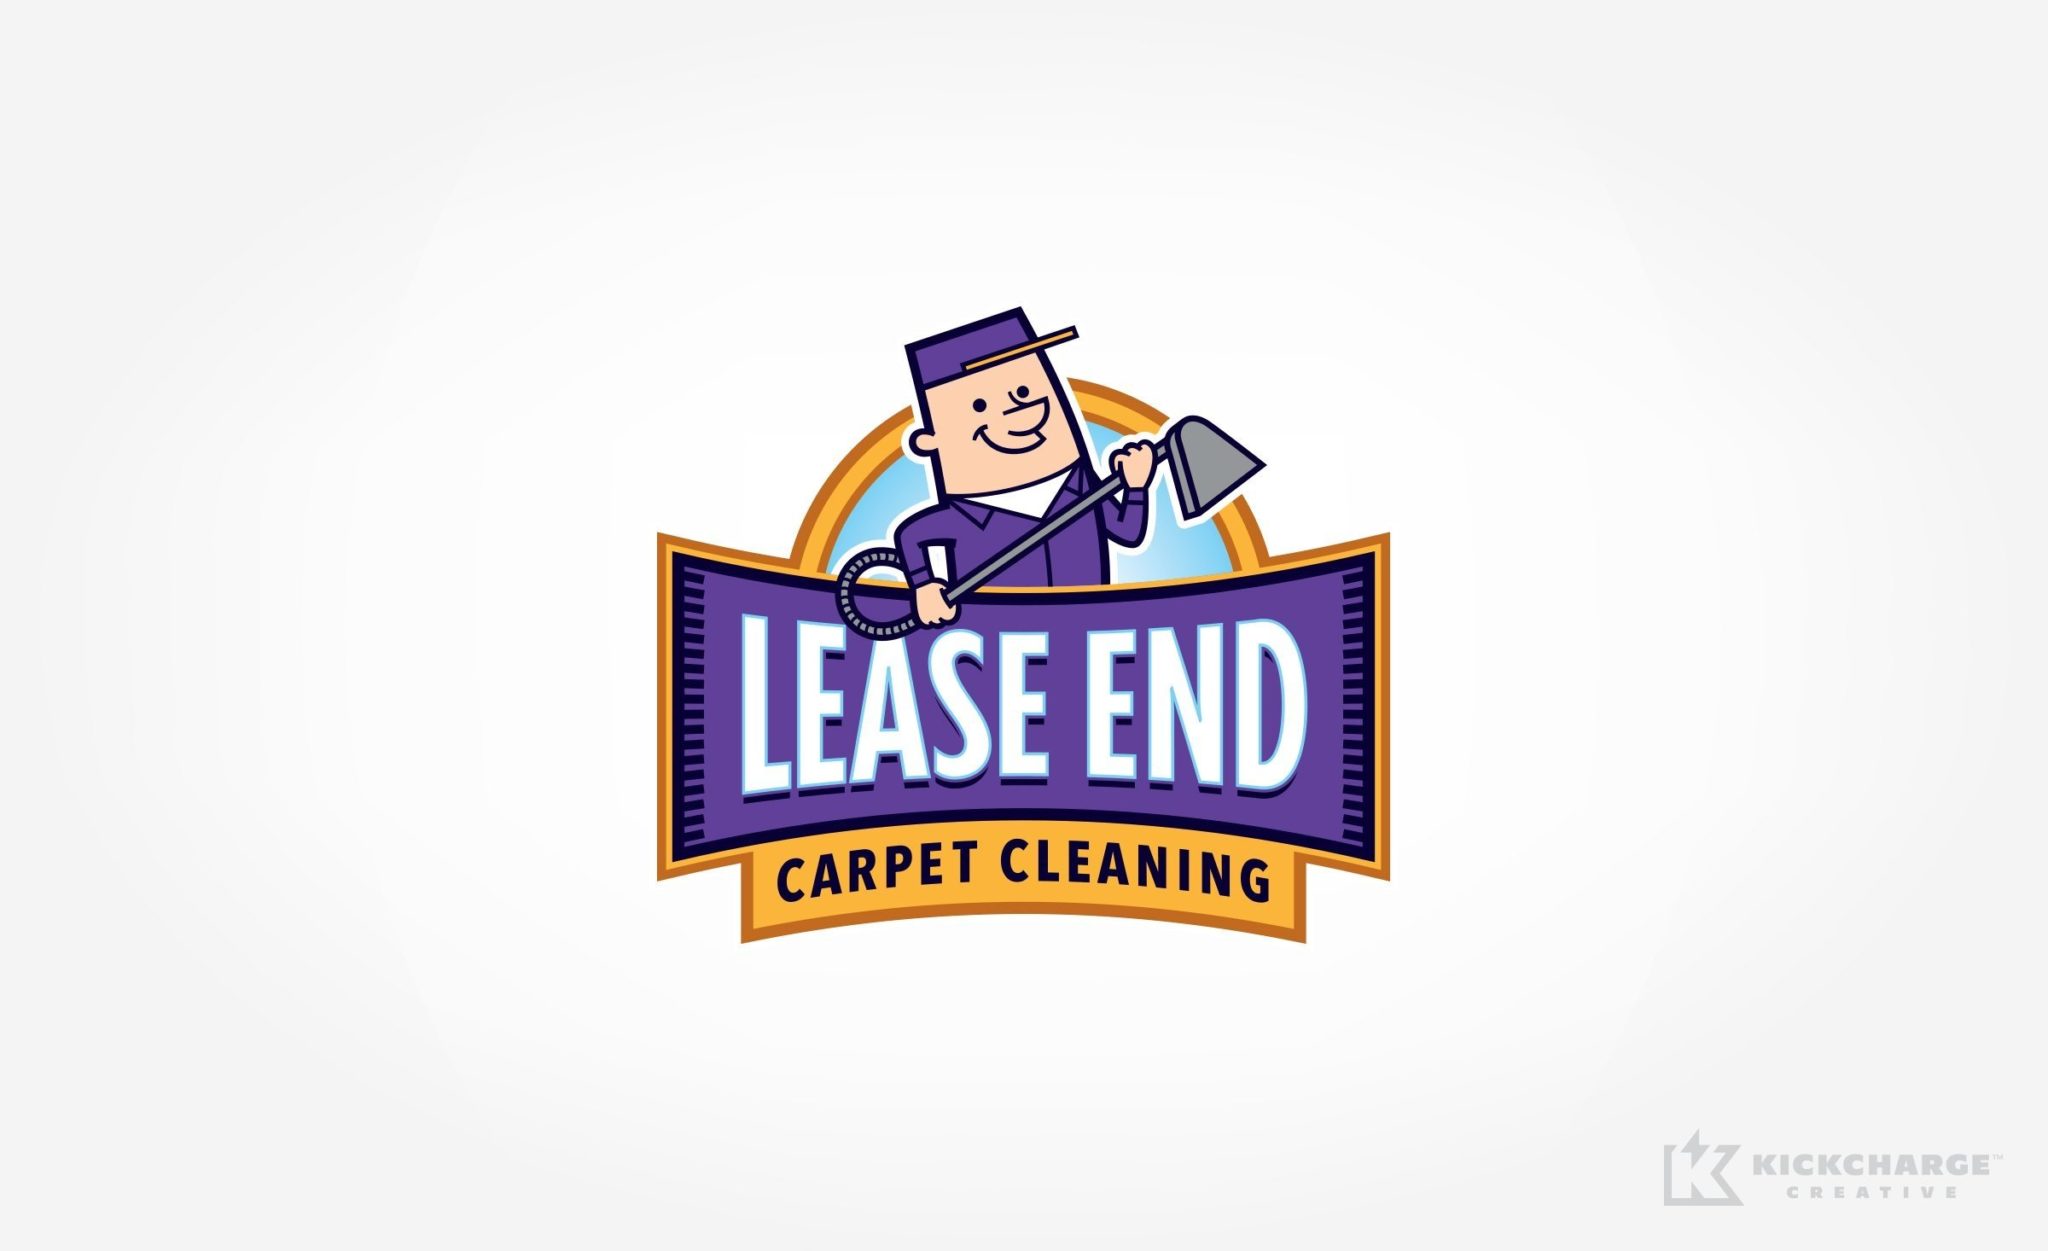 Lease End Carpet Cleaning